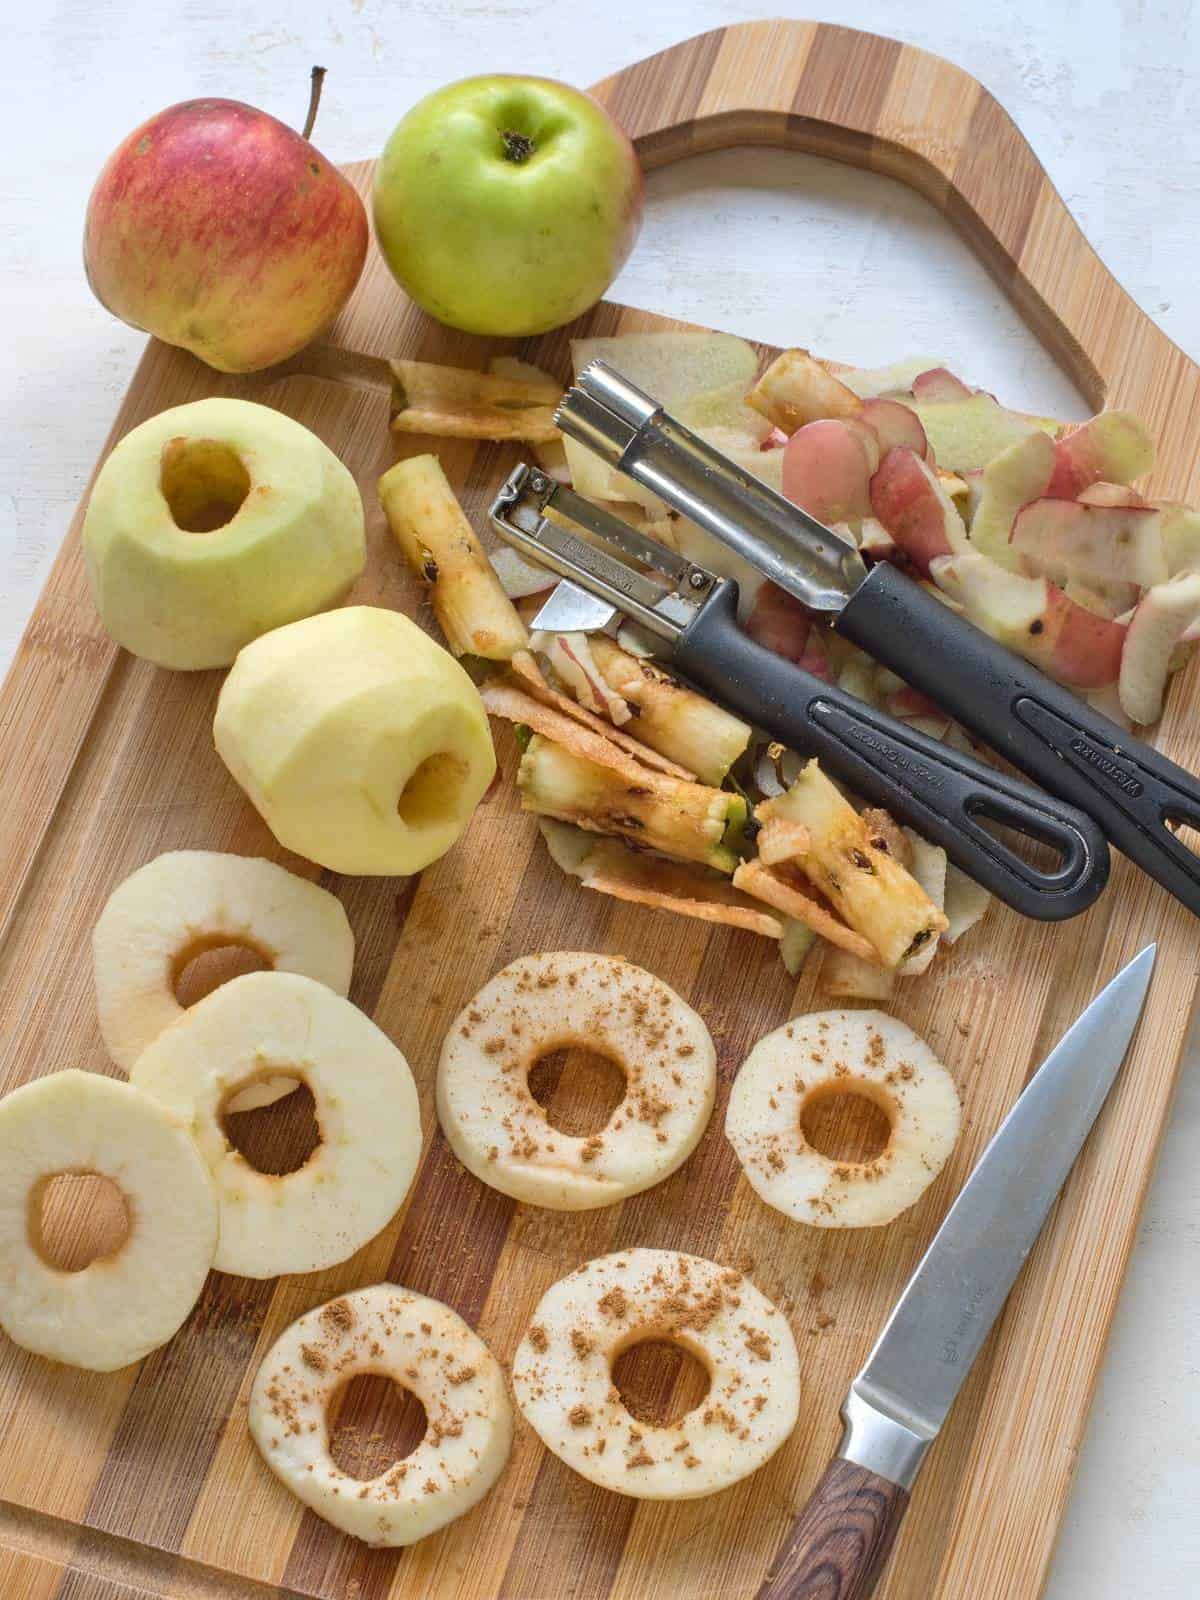 Preparing apple circles for frying. Peeling, core removing, slicing in circles, dusting them with cinnamon.